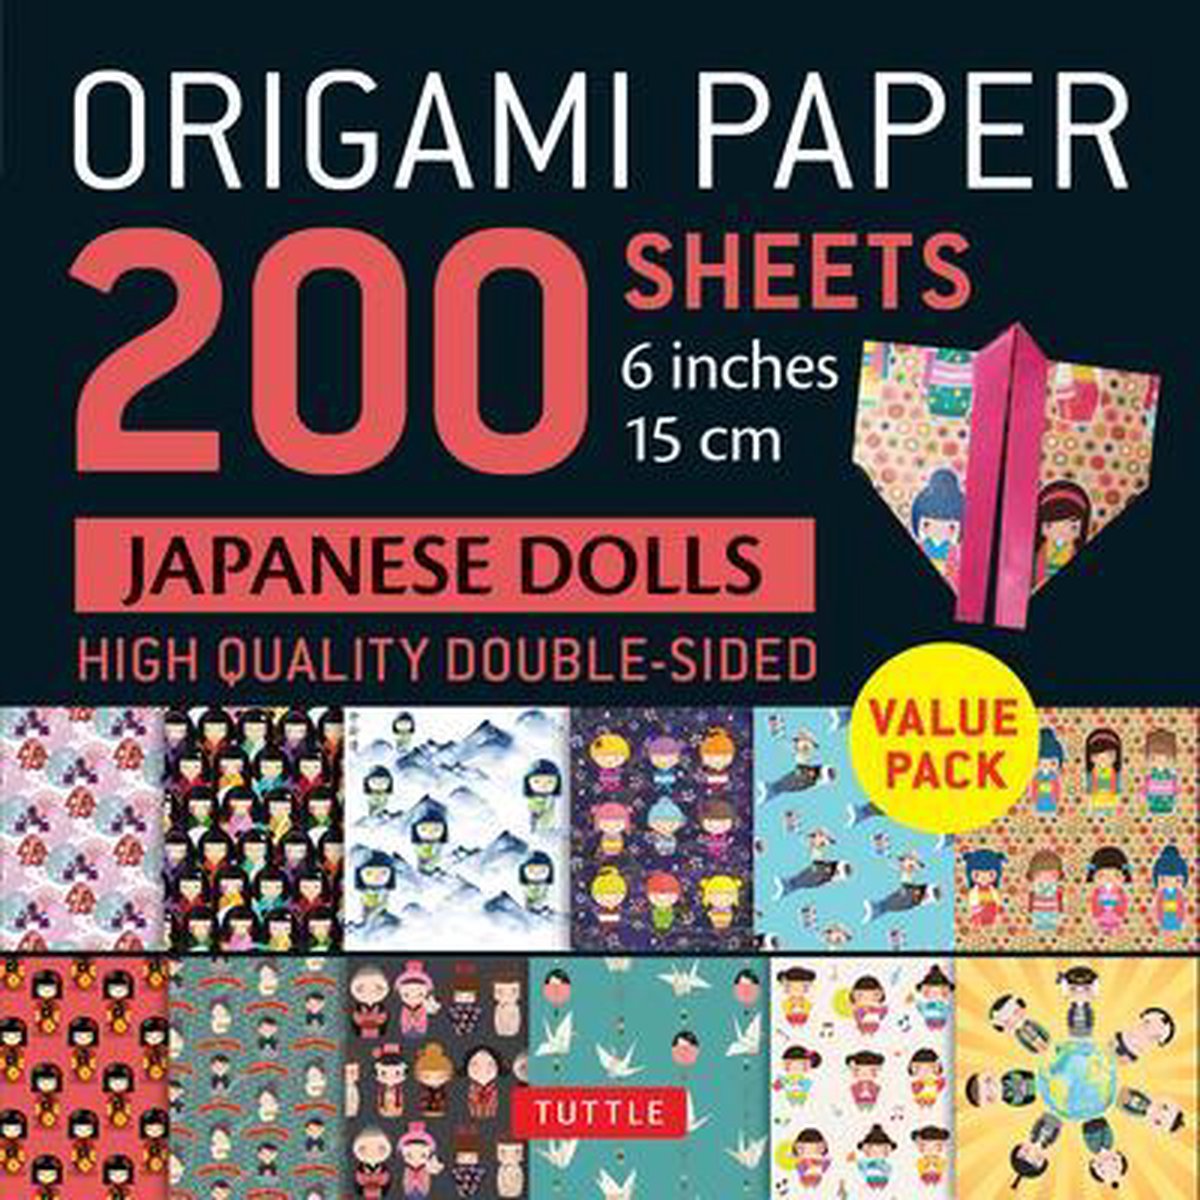 Origami Paper 200 Sheets Japanese Dolls 6 Inches 15 cm